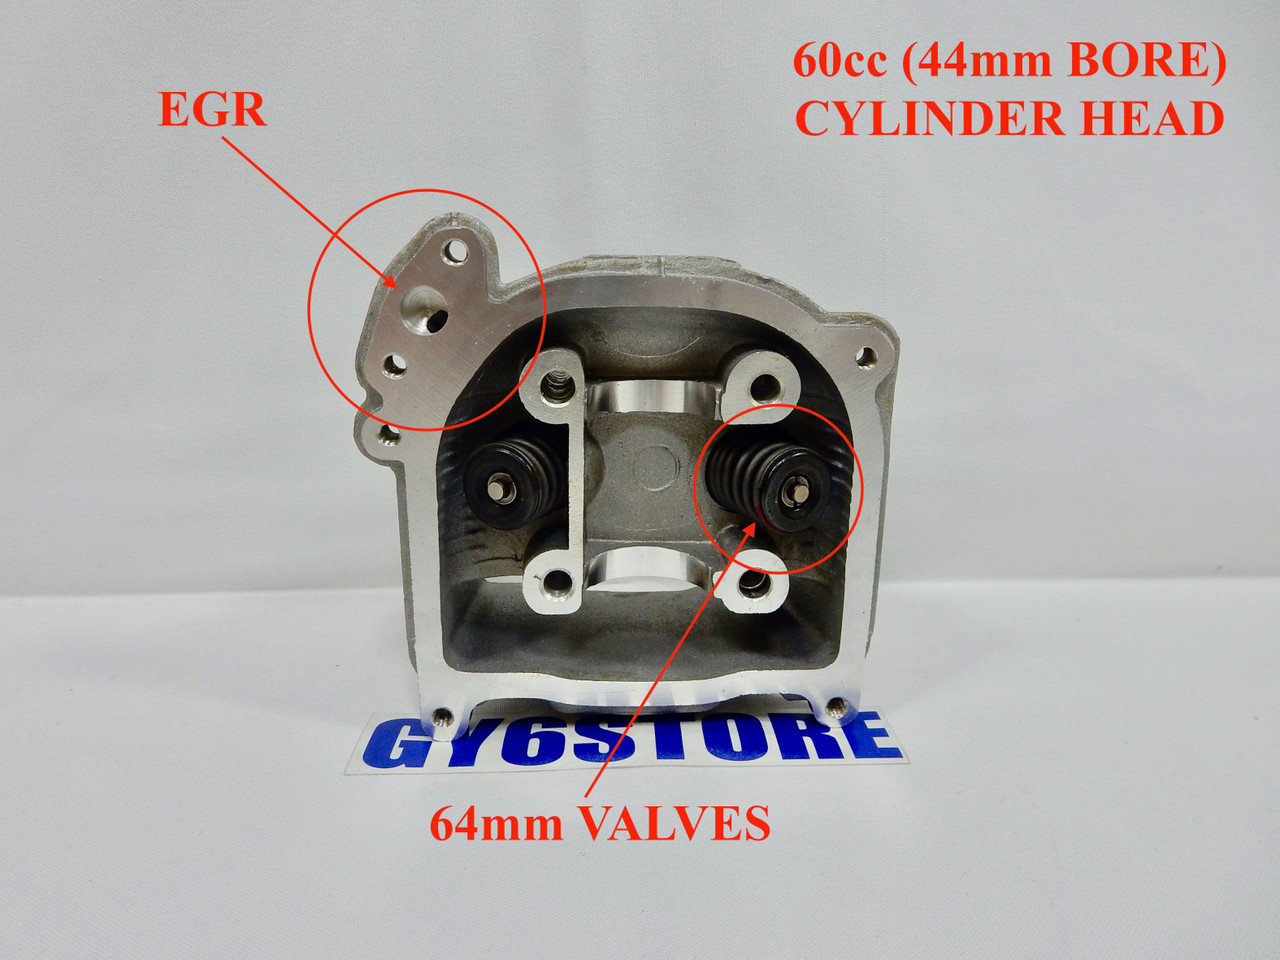 60cc (44mm BORE) EGR STYLE CYLINDER HEAD WITH *64mm VALVES* FOR QMB139 MOTORS